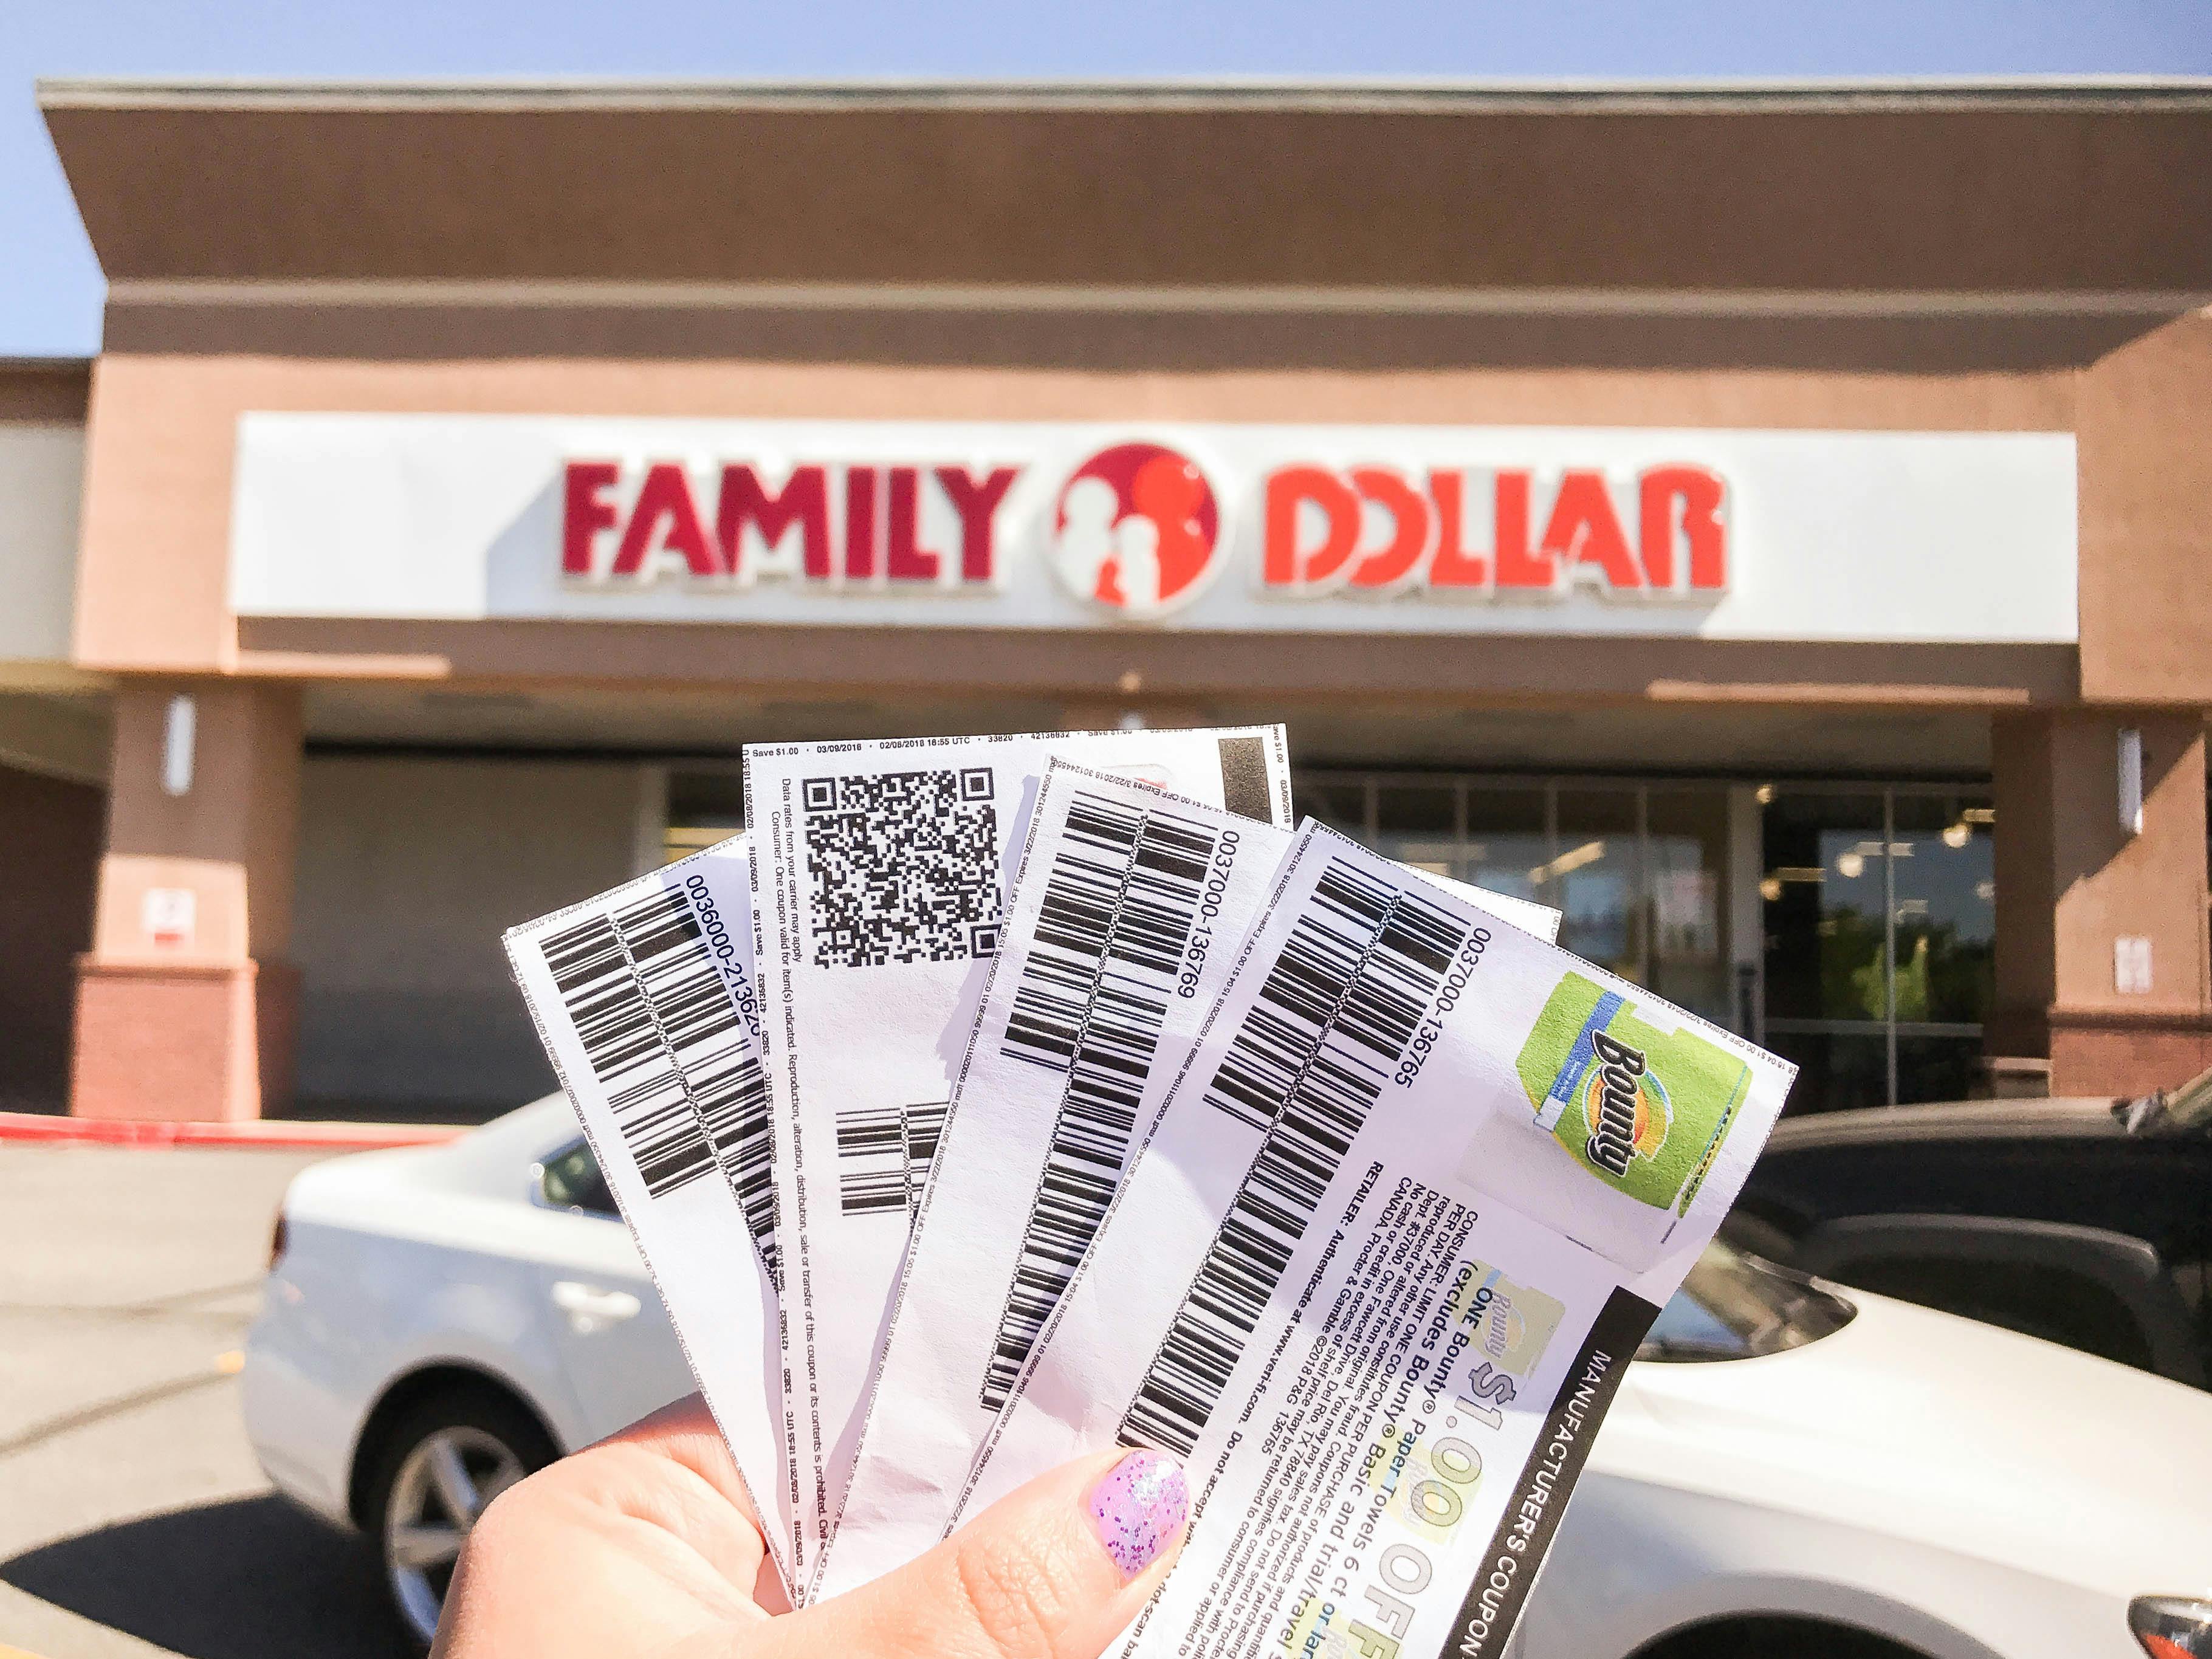 holding manufacturers coupons near family dollar store entrance